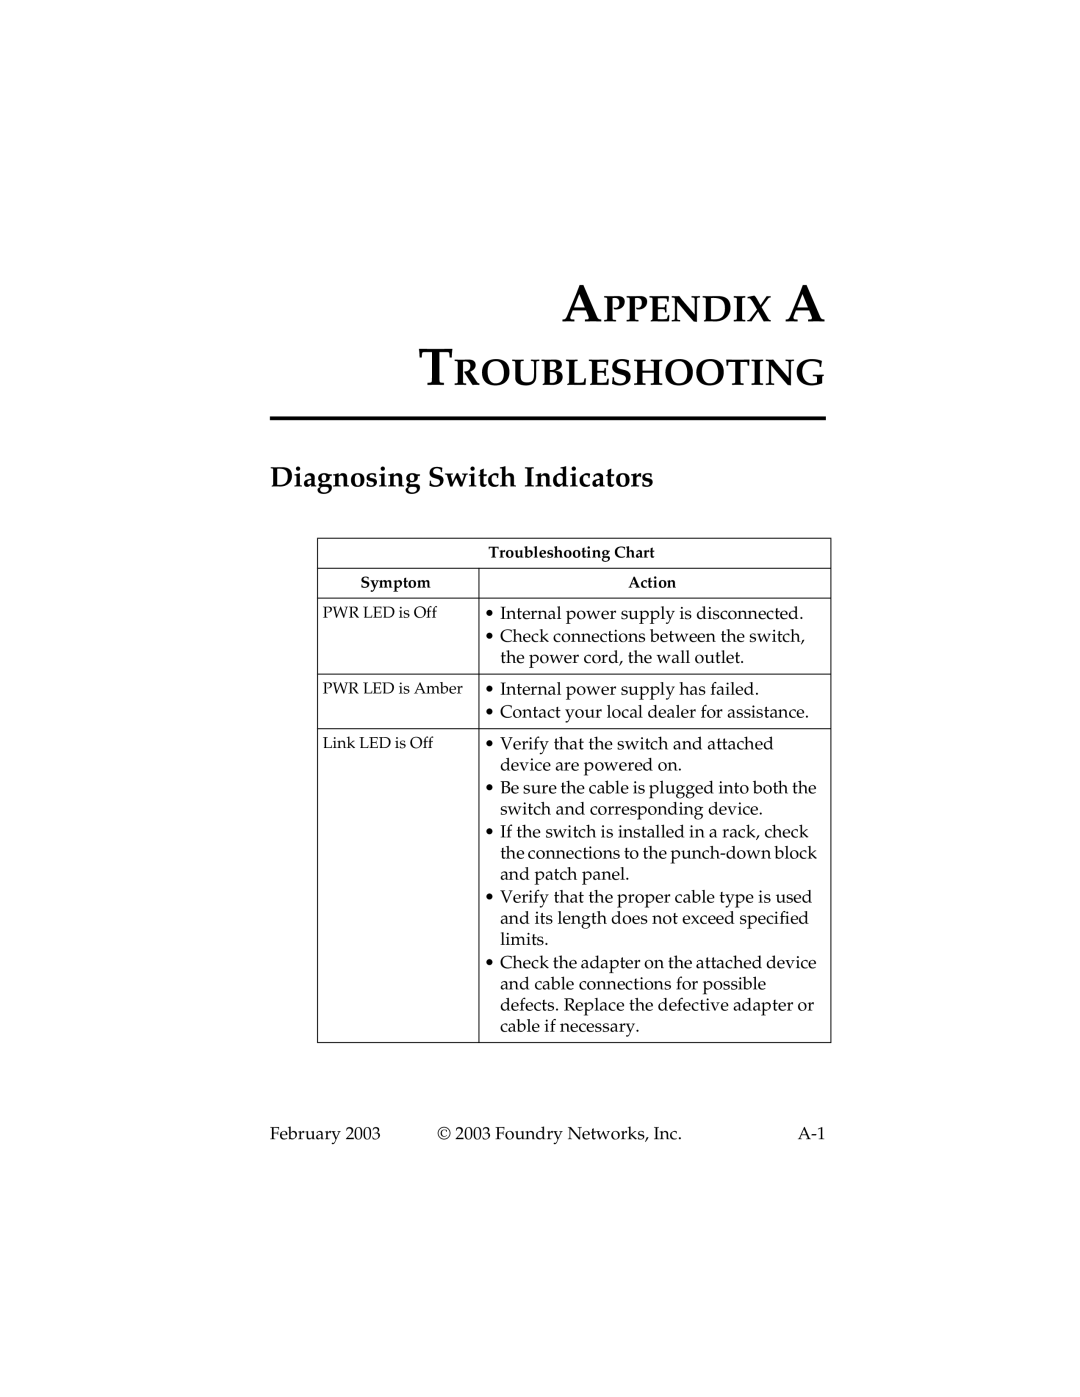 Foundry Networks 2402CF manual Appendix a Troubleshooting, Diagnosing Switch Indicators 